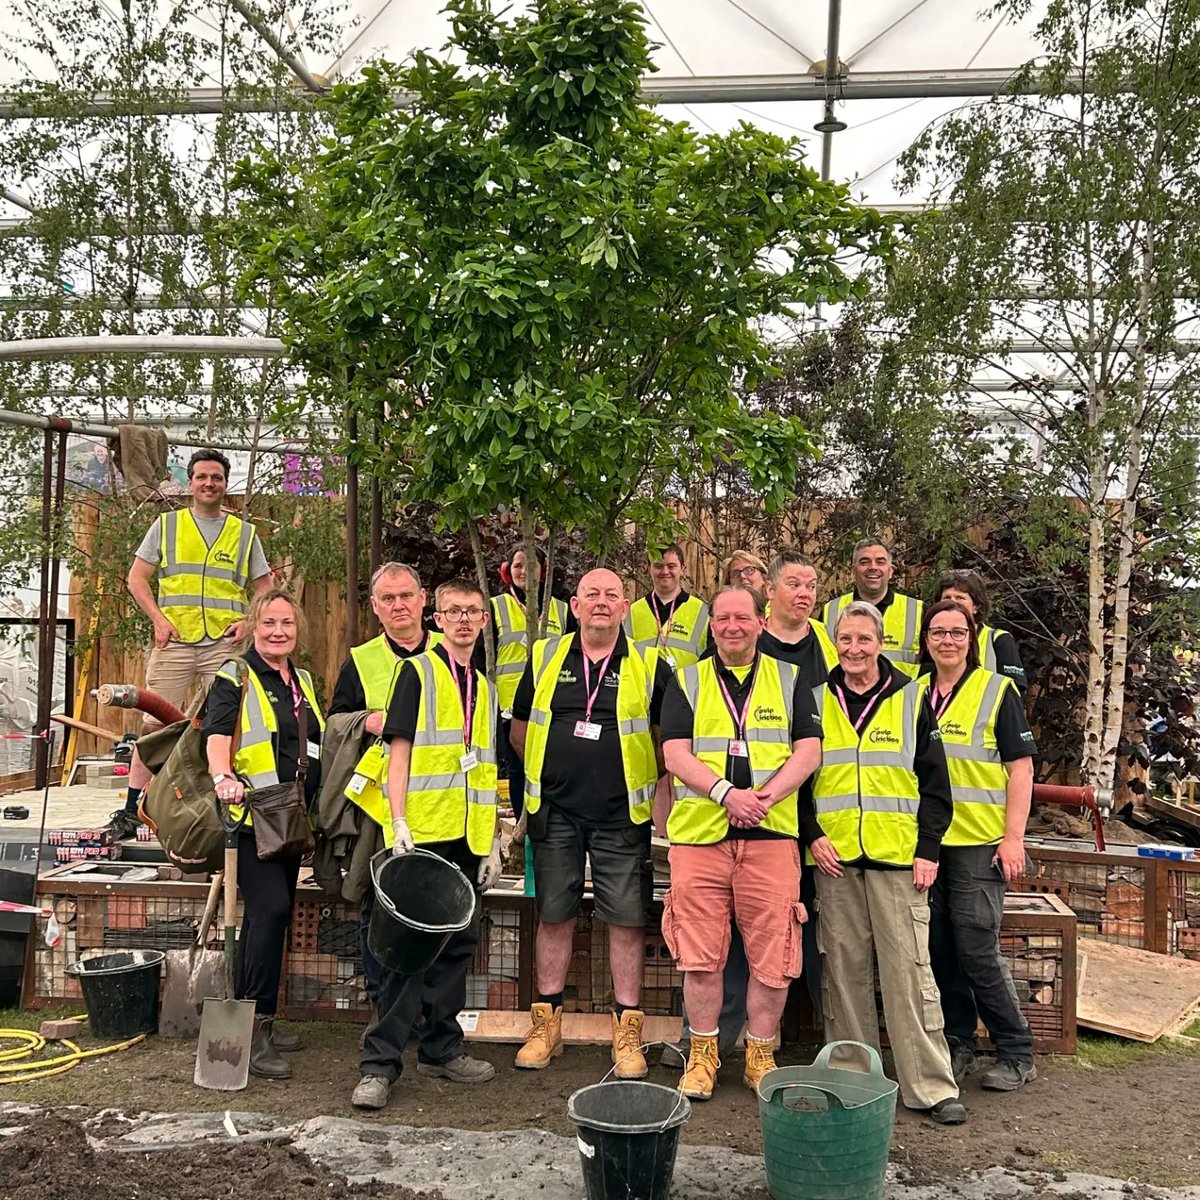 #ChelseaFlowerShow Garden update! It's all go go go on site... ✅ Distributing soil ✅ Adding the fire hose to the central structure ✅ Laying recycled paving slabs ✅ Filling gabions with repurposed materials ✅ Repotting plants delivered by @nottsfire ✅ Prepping our wormery